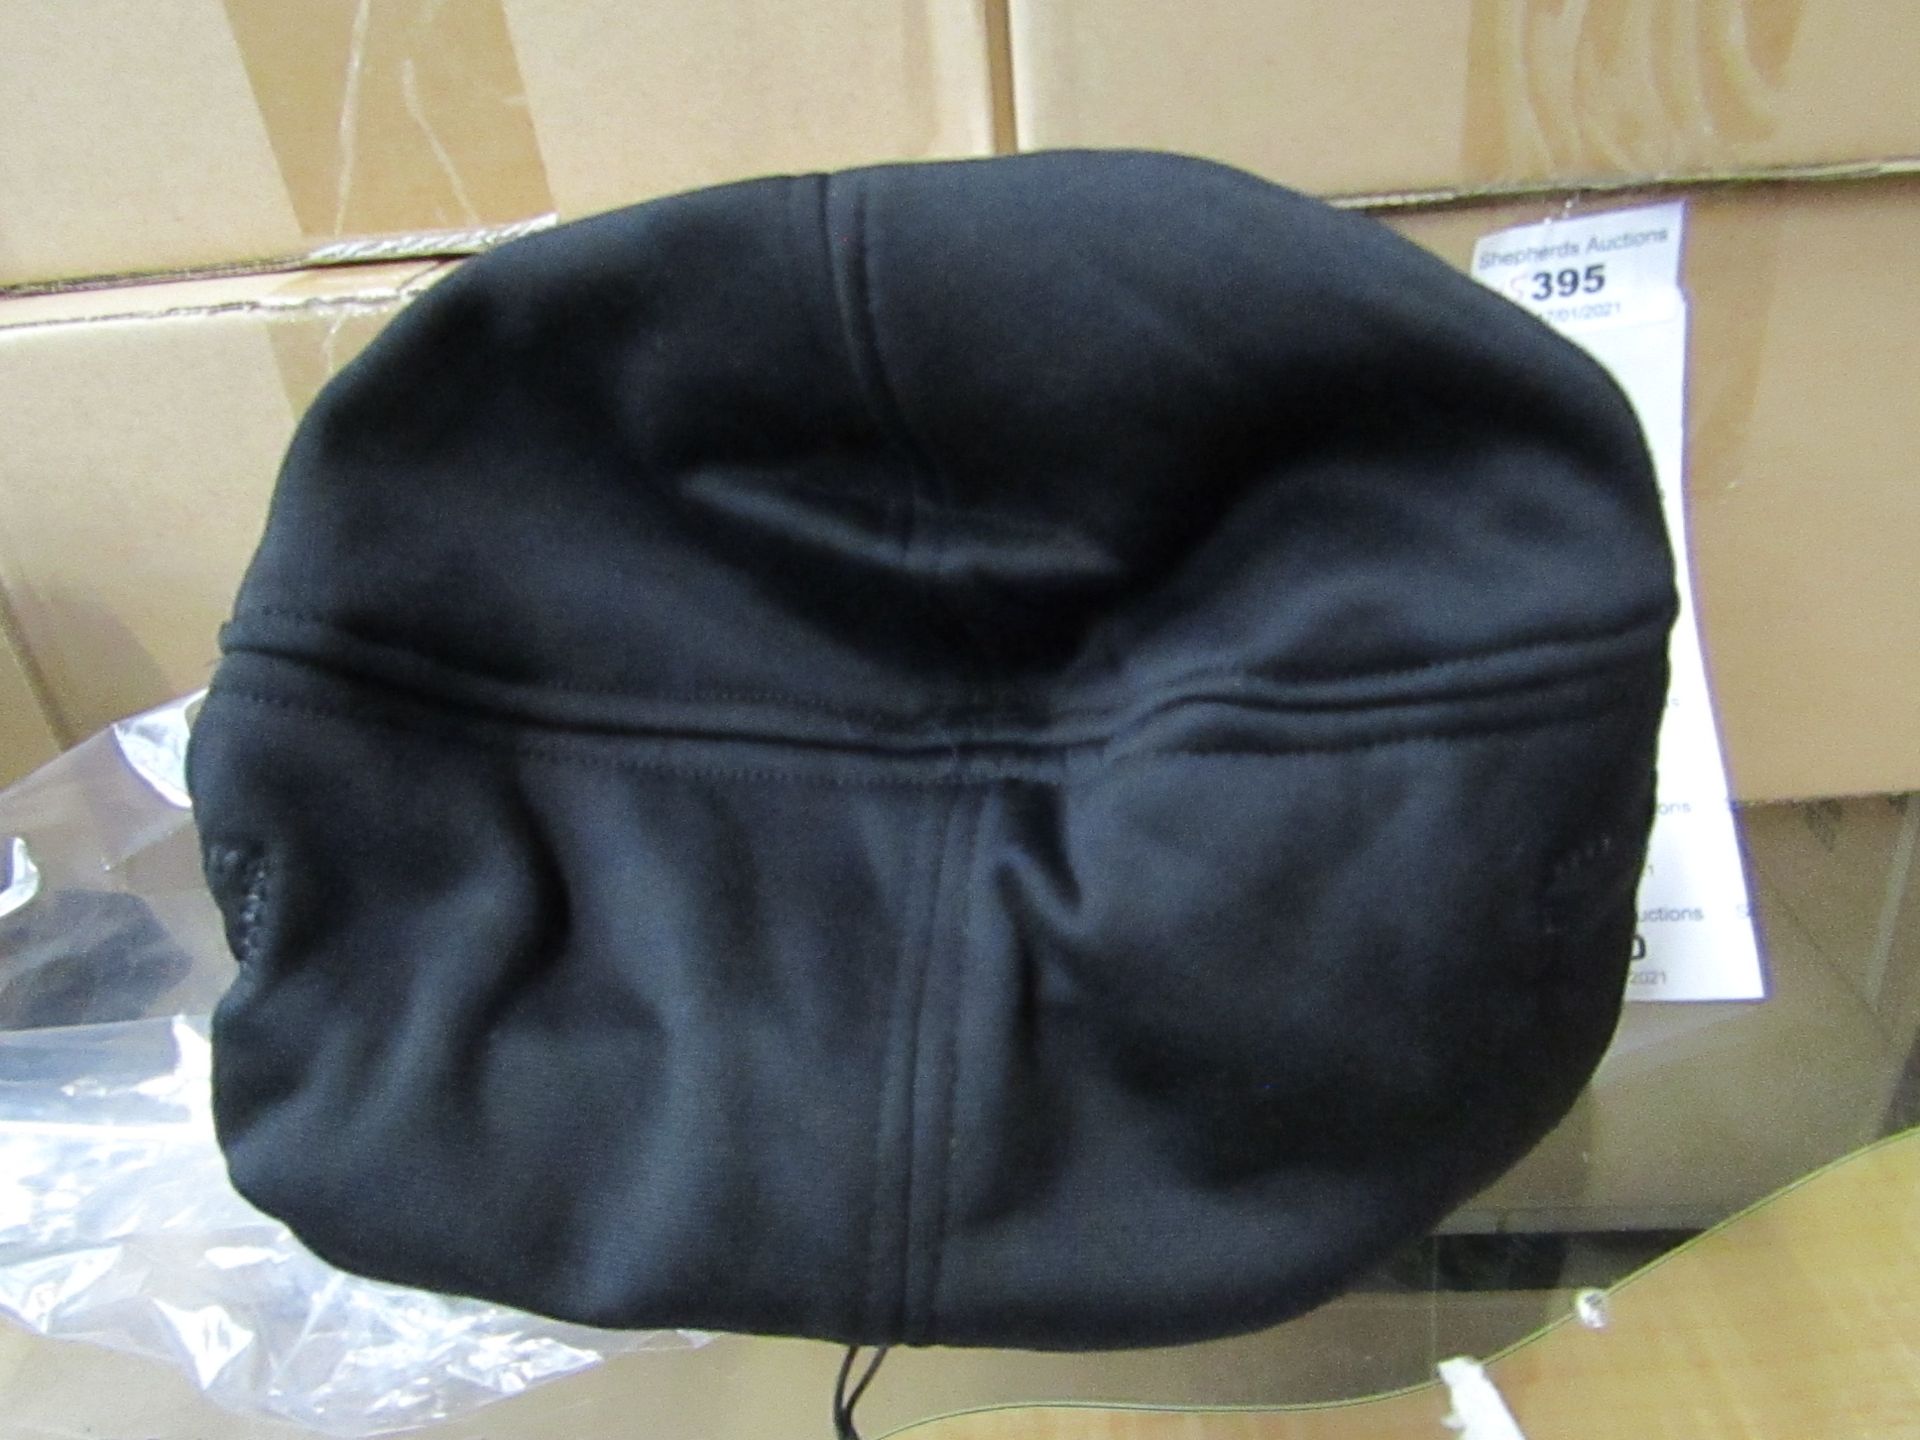 5x Beanie Hat With Built-In Speaker Located On Ears - Tested Working - All Packaged.